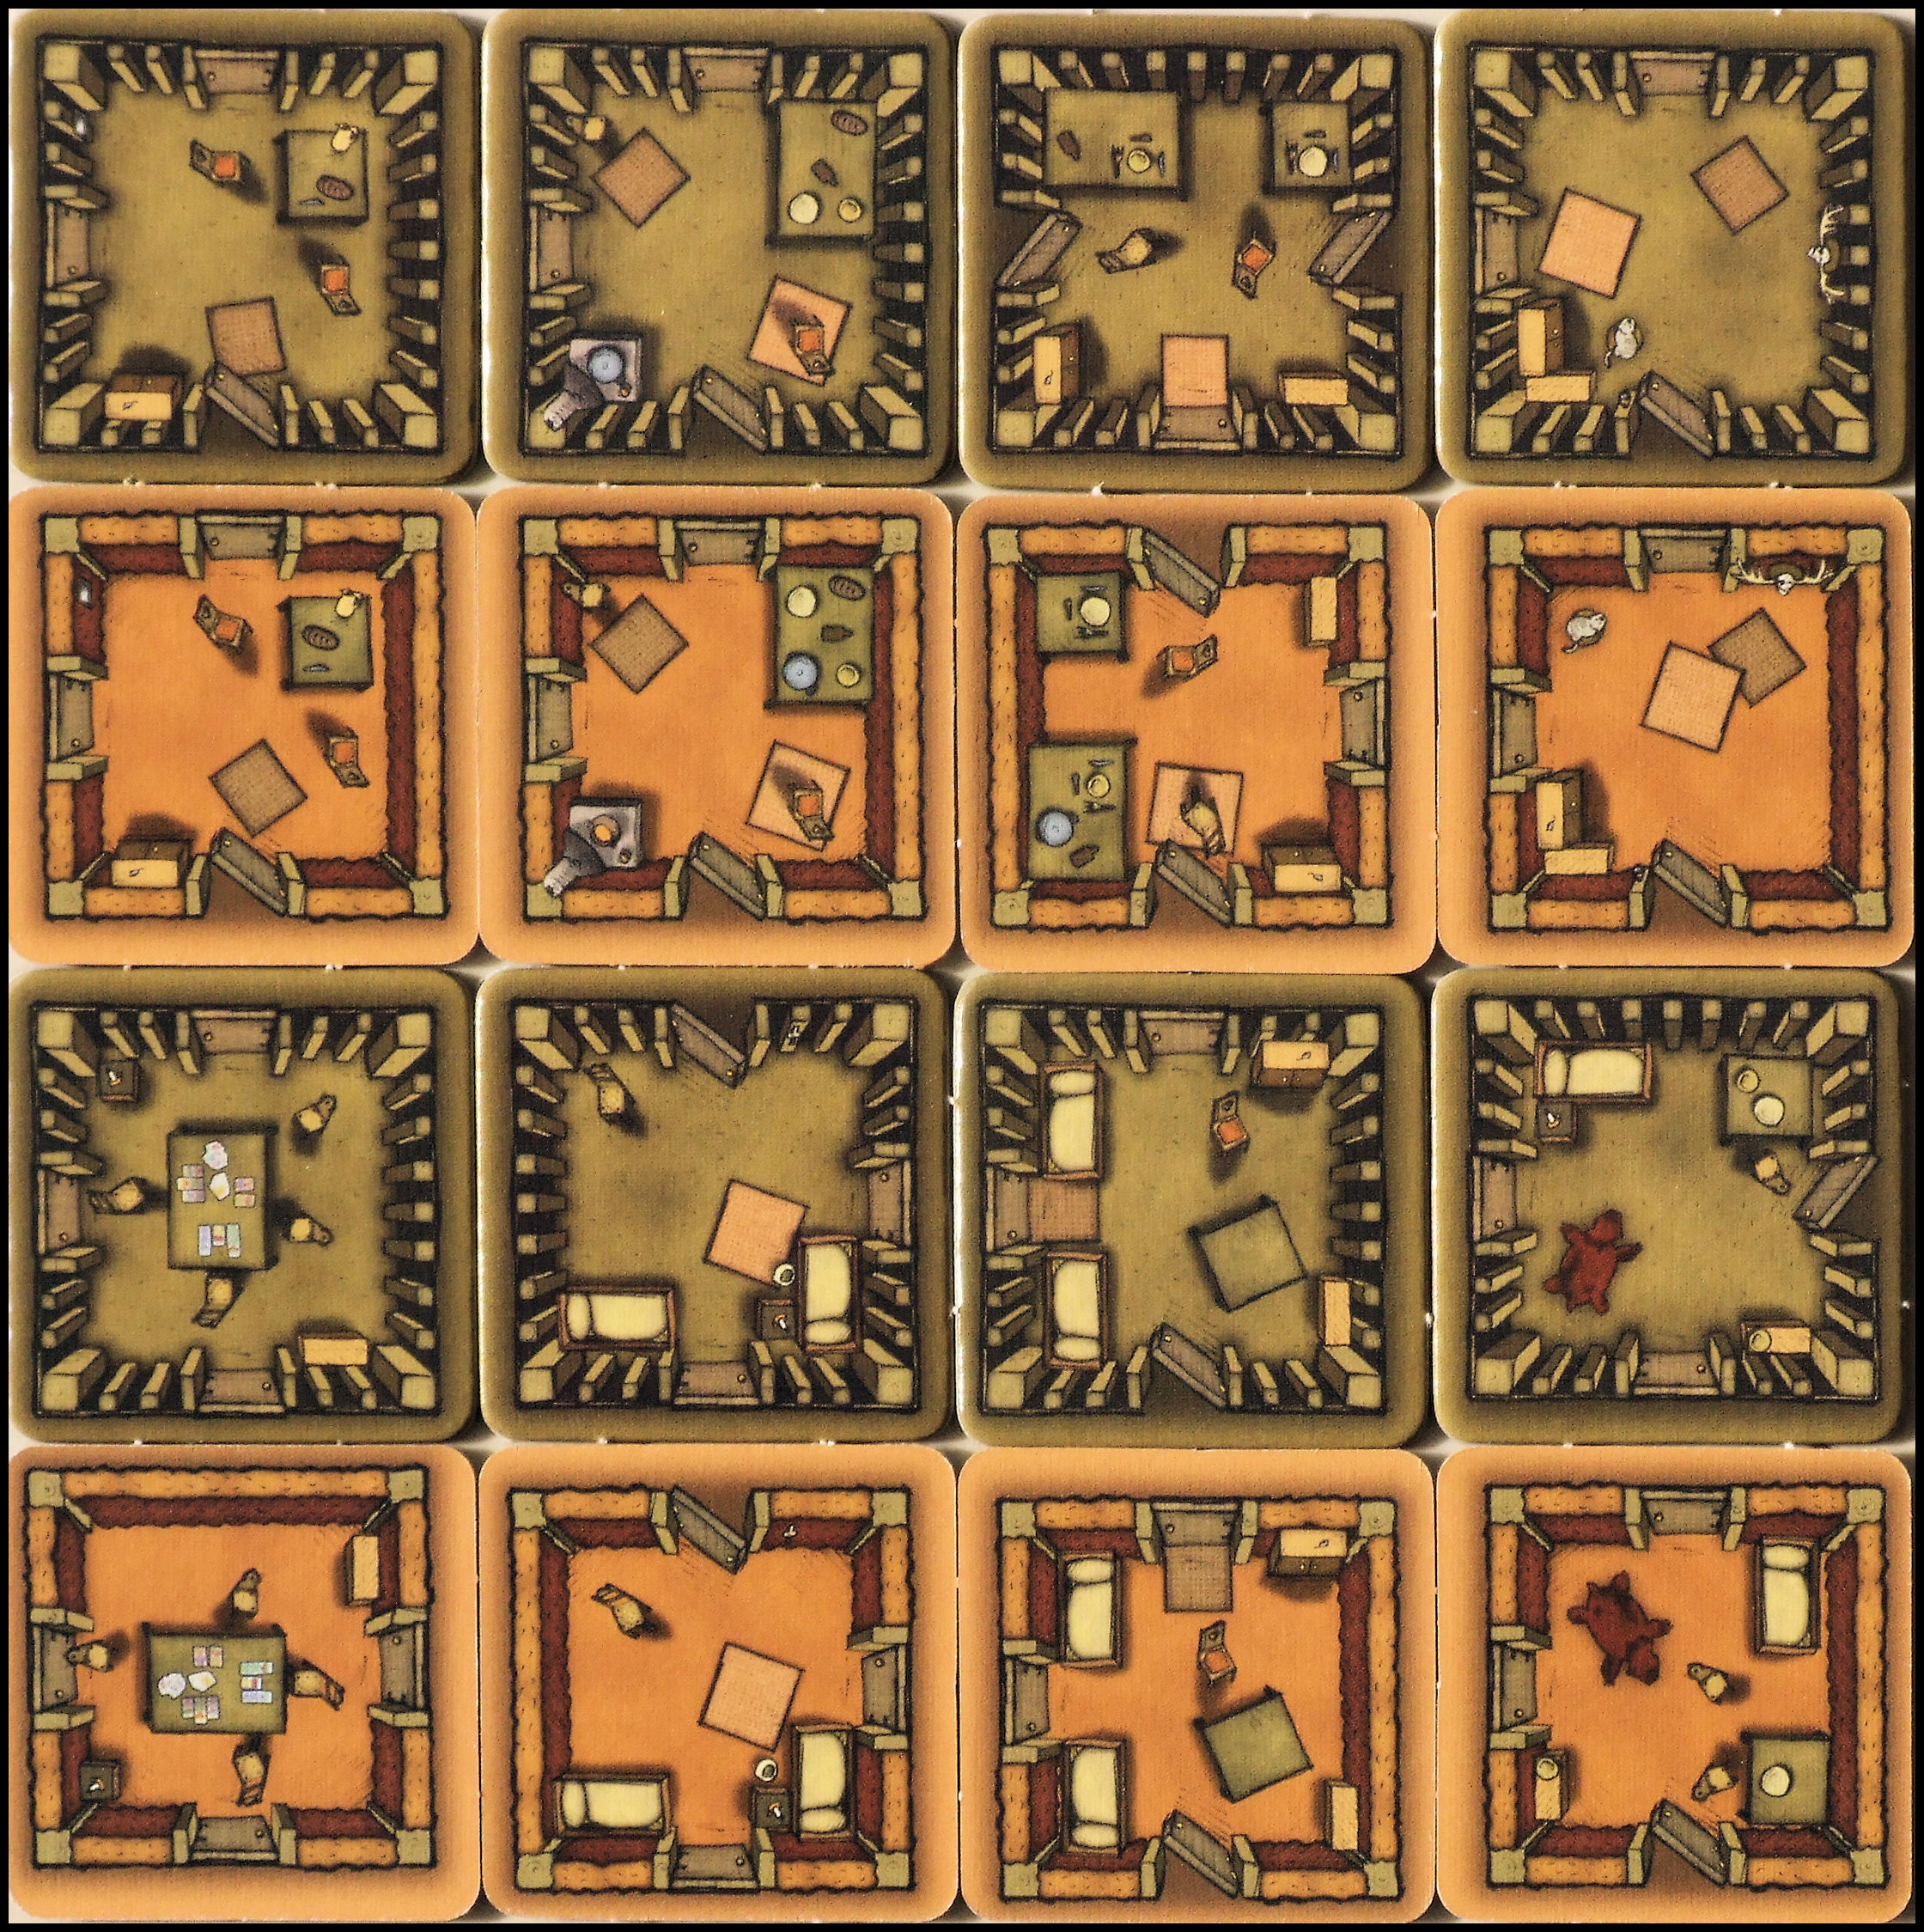 Agricola - Wood And Clay Buildings (Z-Man Games Edition)